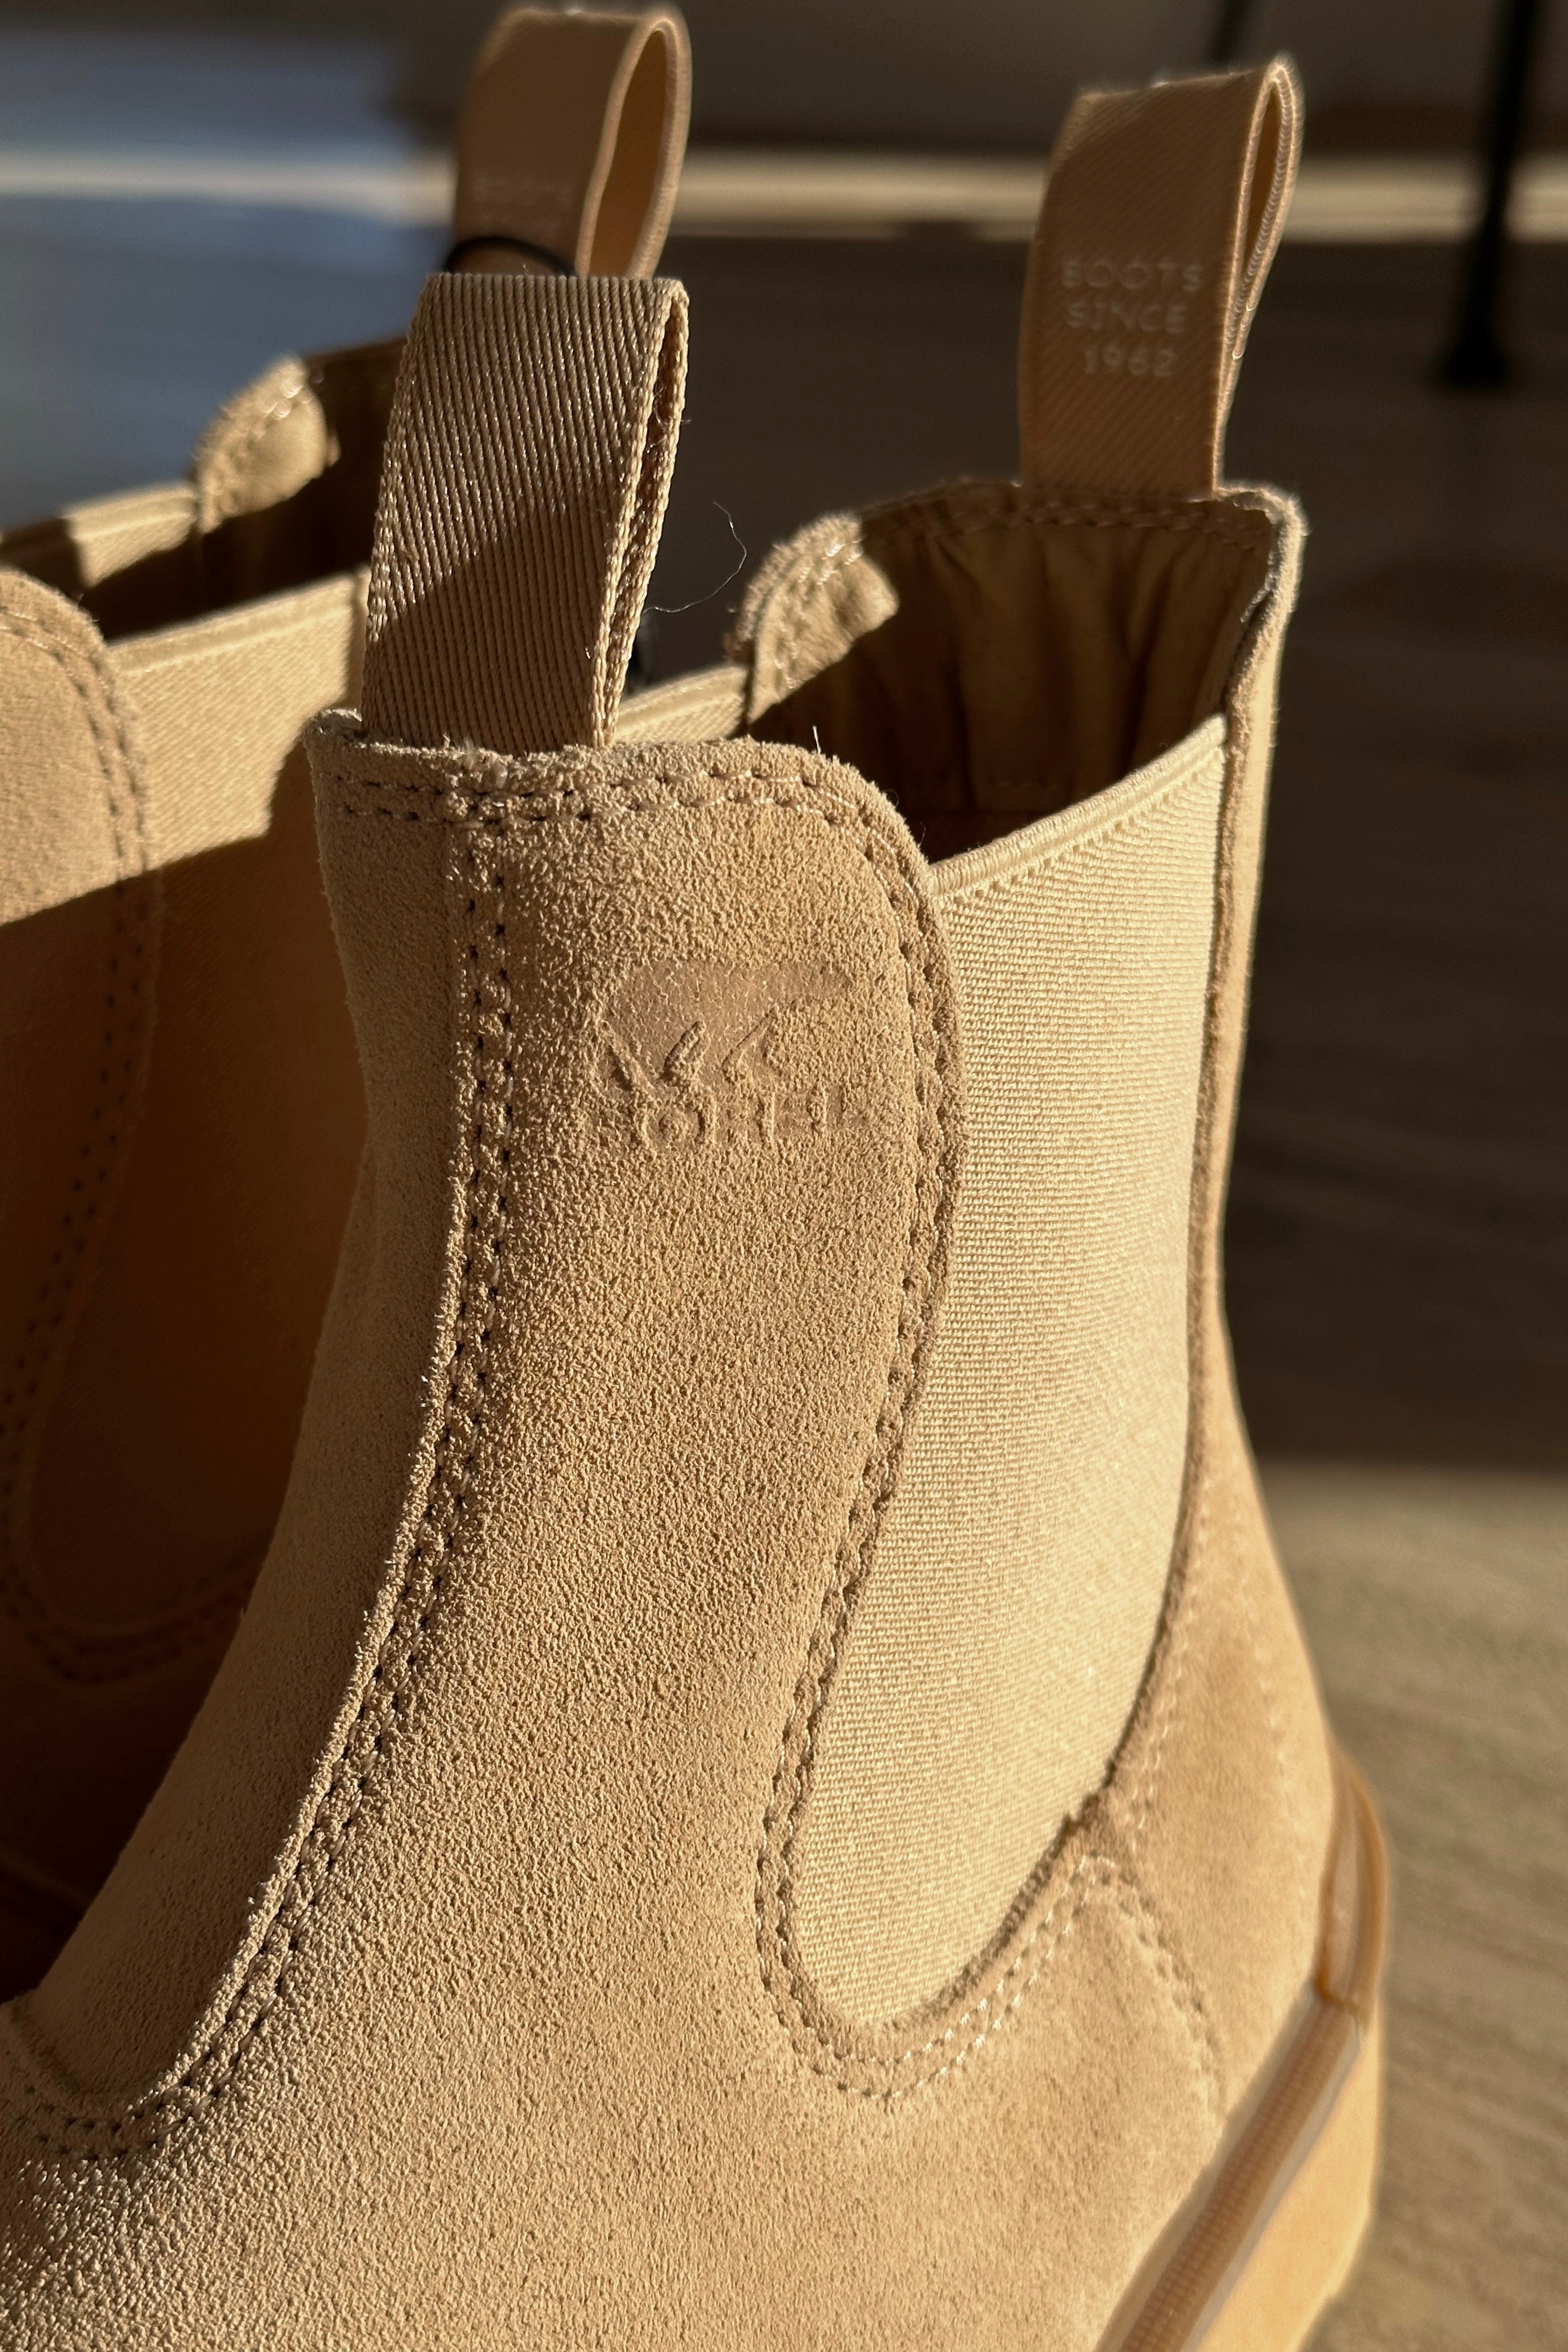 Close up view of the Hi-Line Chelsea Boot in Canoe Ceramic which features tan waterproof suede, monochrome lightweight sole, stretch panels on each side, pull tabs, round toe, 1 inch platform height and 1 inch heel height